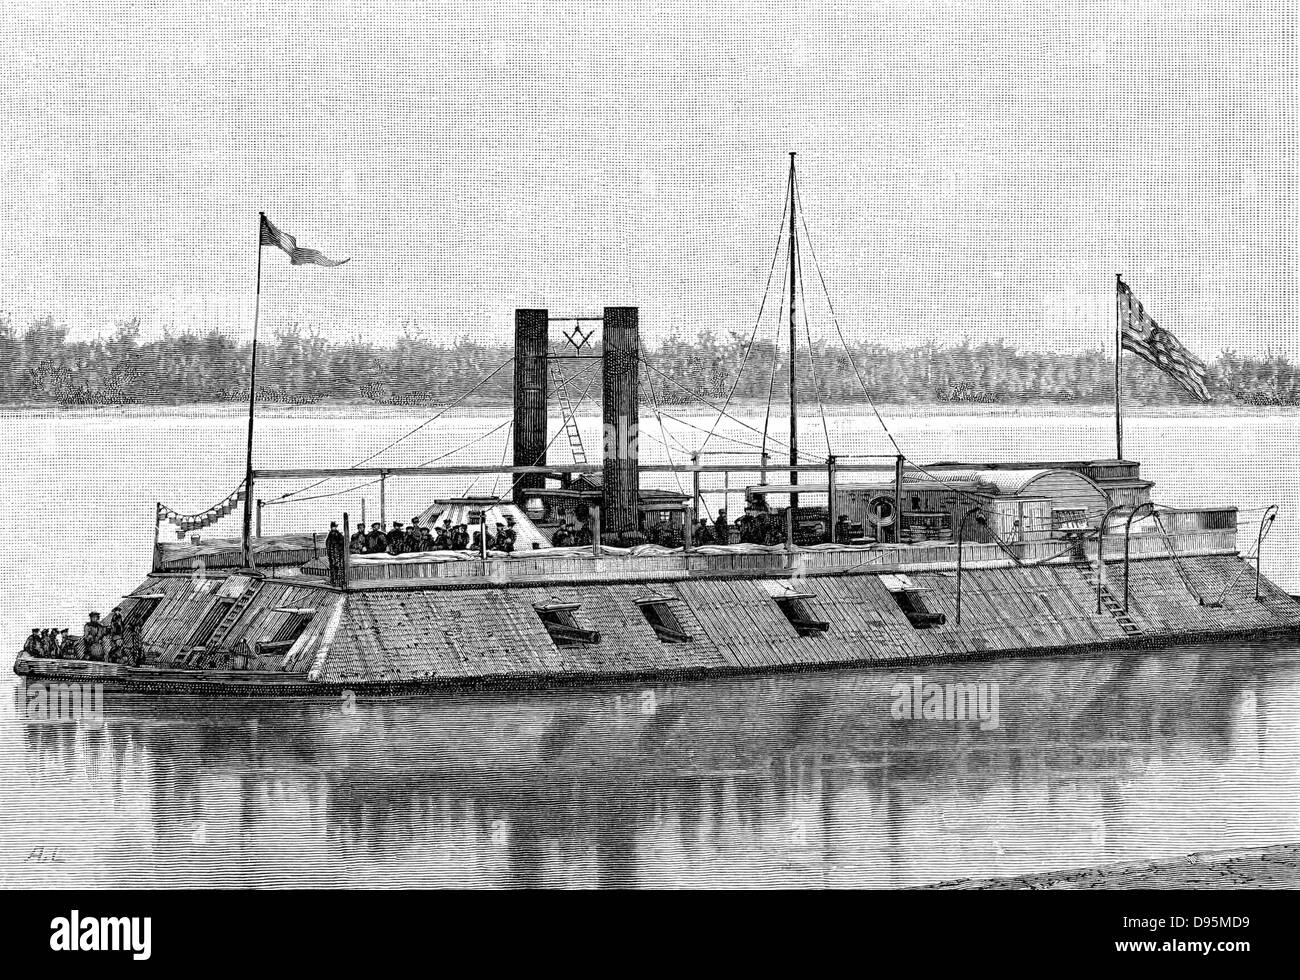 St Louis', James Buchanan Eads' earliest ironclad gunboat employed by Unionist (northern) side in American Civil War 1861-1865. Sunk by torpedo in 1863.  Engraving. Stock Photo